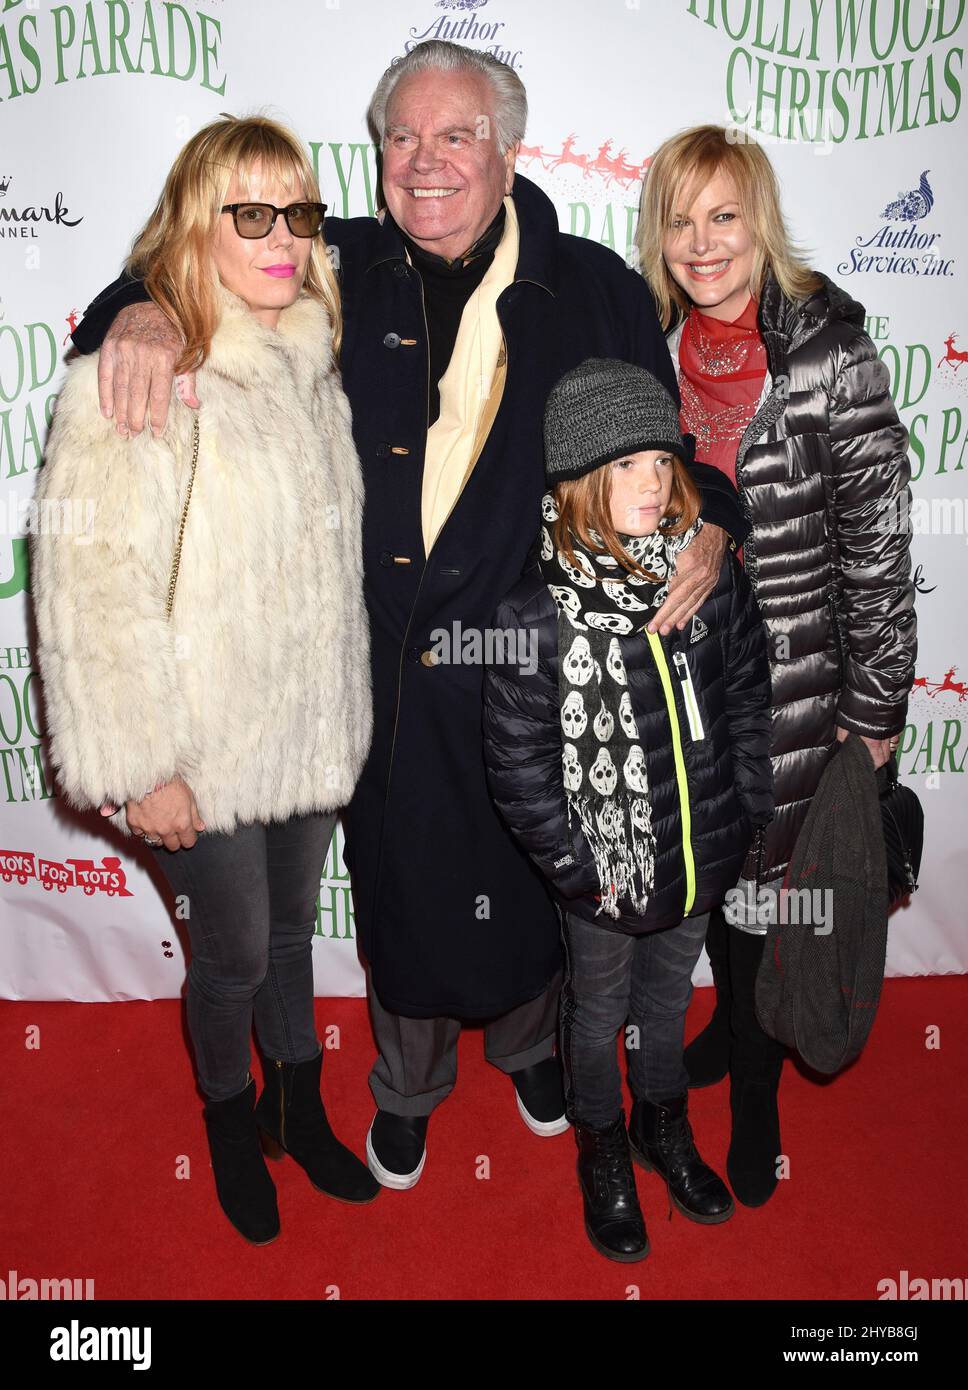 Courtney Wagner, Robert Wagner, Katie Wagner and Riley Lewis attends the 85th Annual Hollywood Christmas Parade held on Hollywood Blvd. Stock Photo